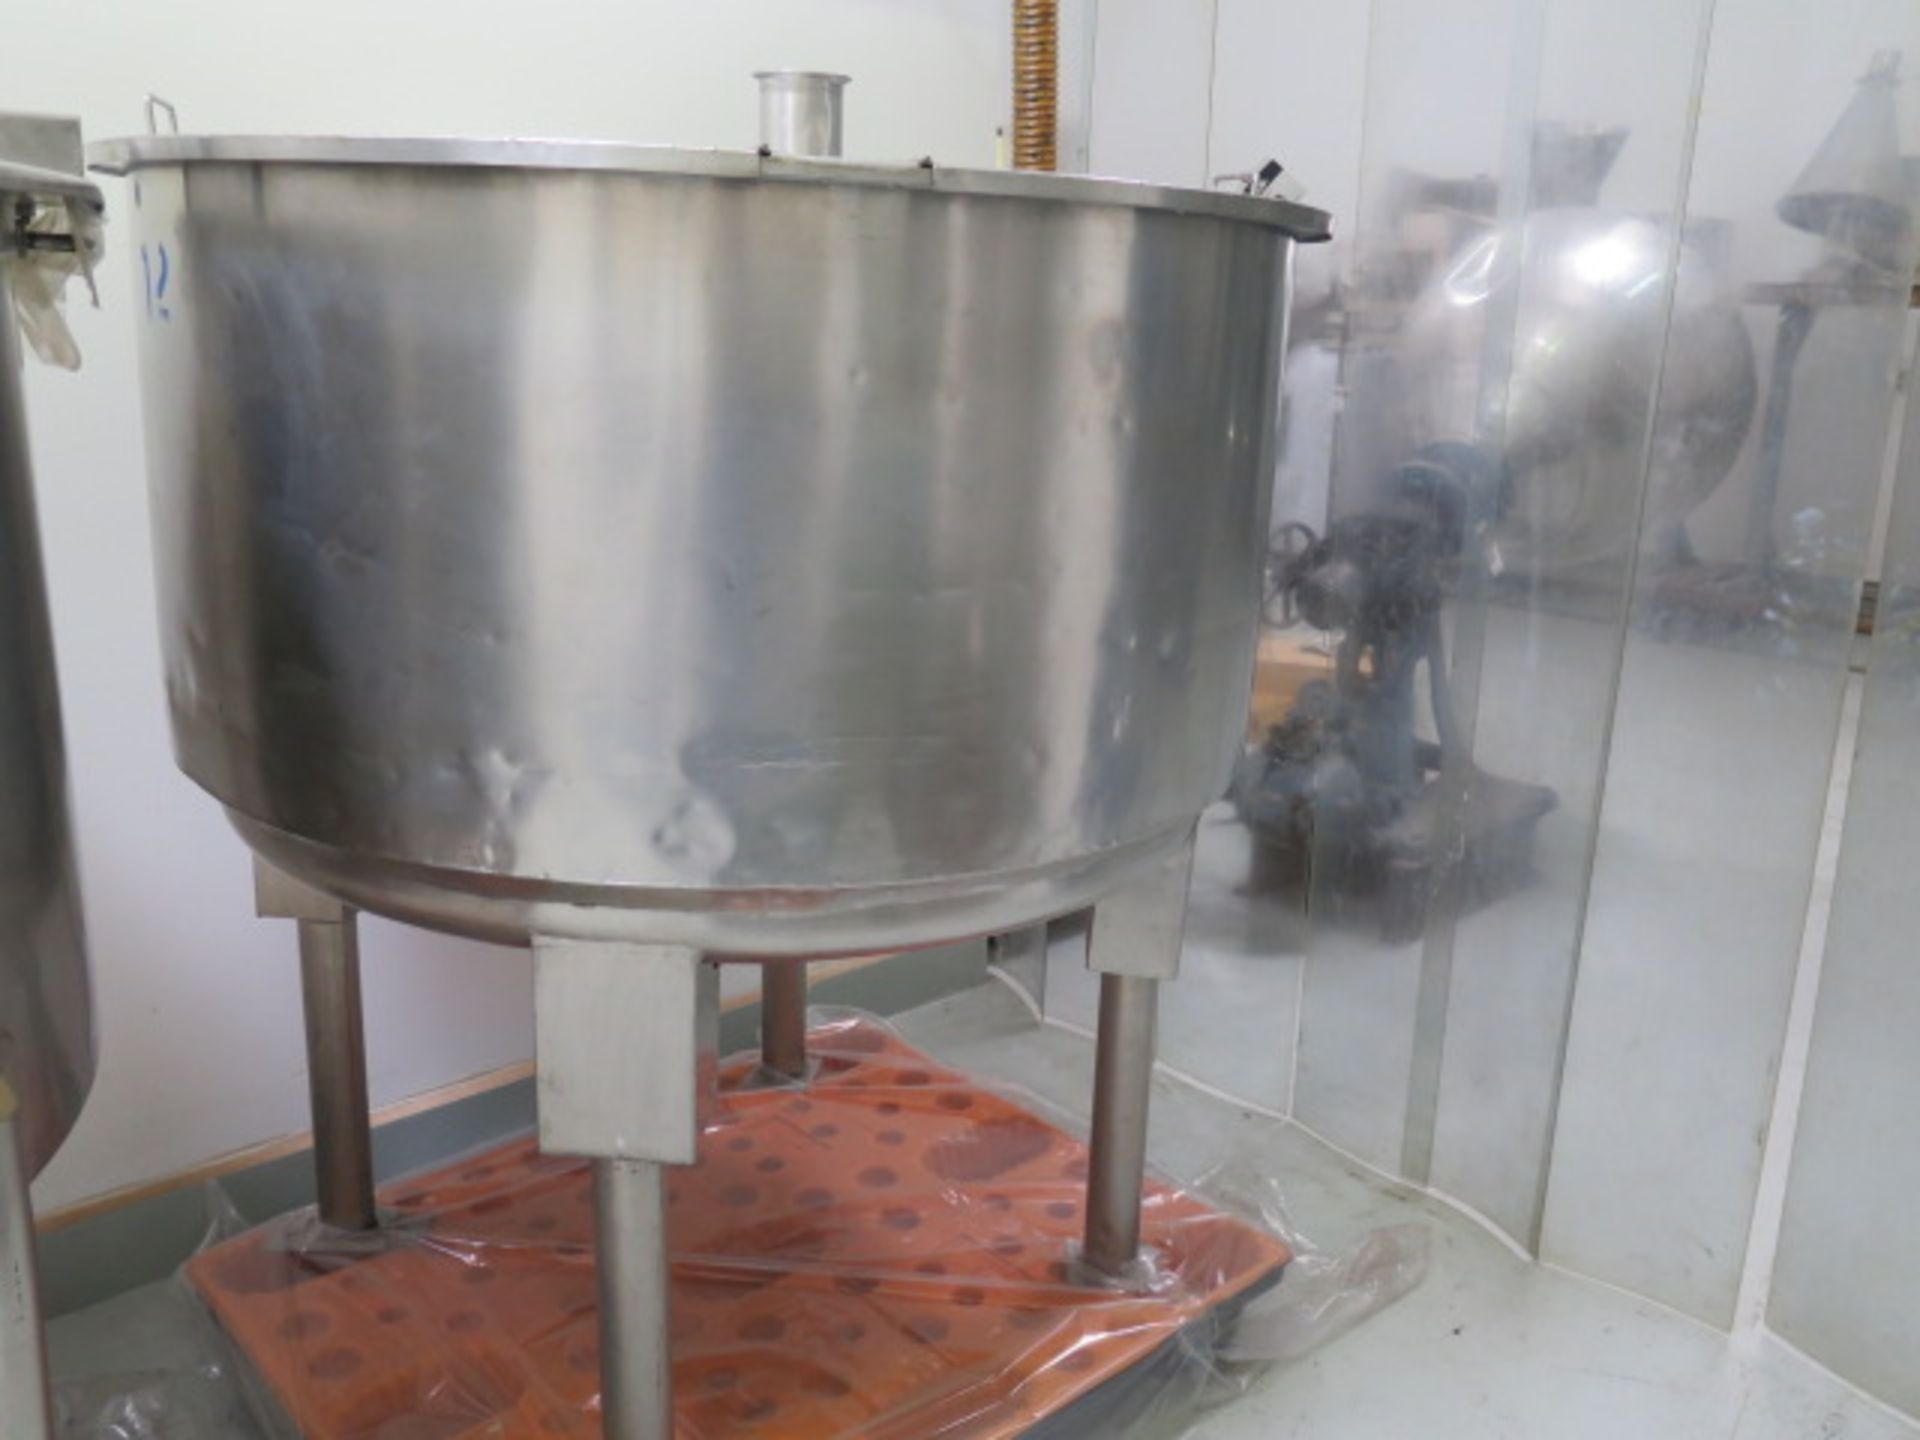 48” Dia x 36”H Jacketed Stainless Steel Tank (SOLD AS-IS - NO WARRANTY) - Image 2 of 5